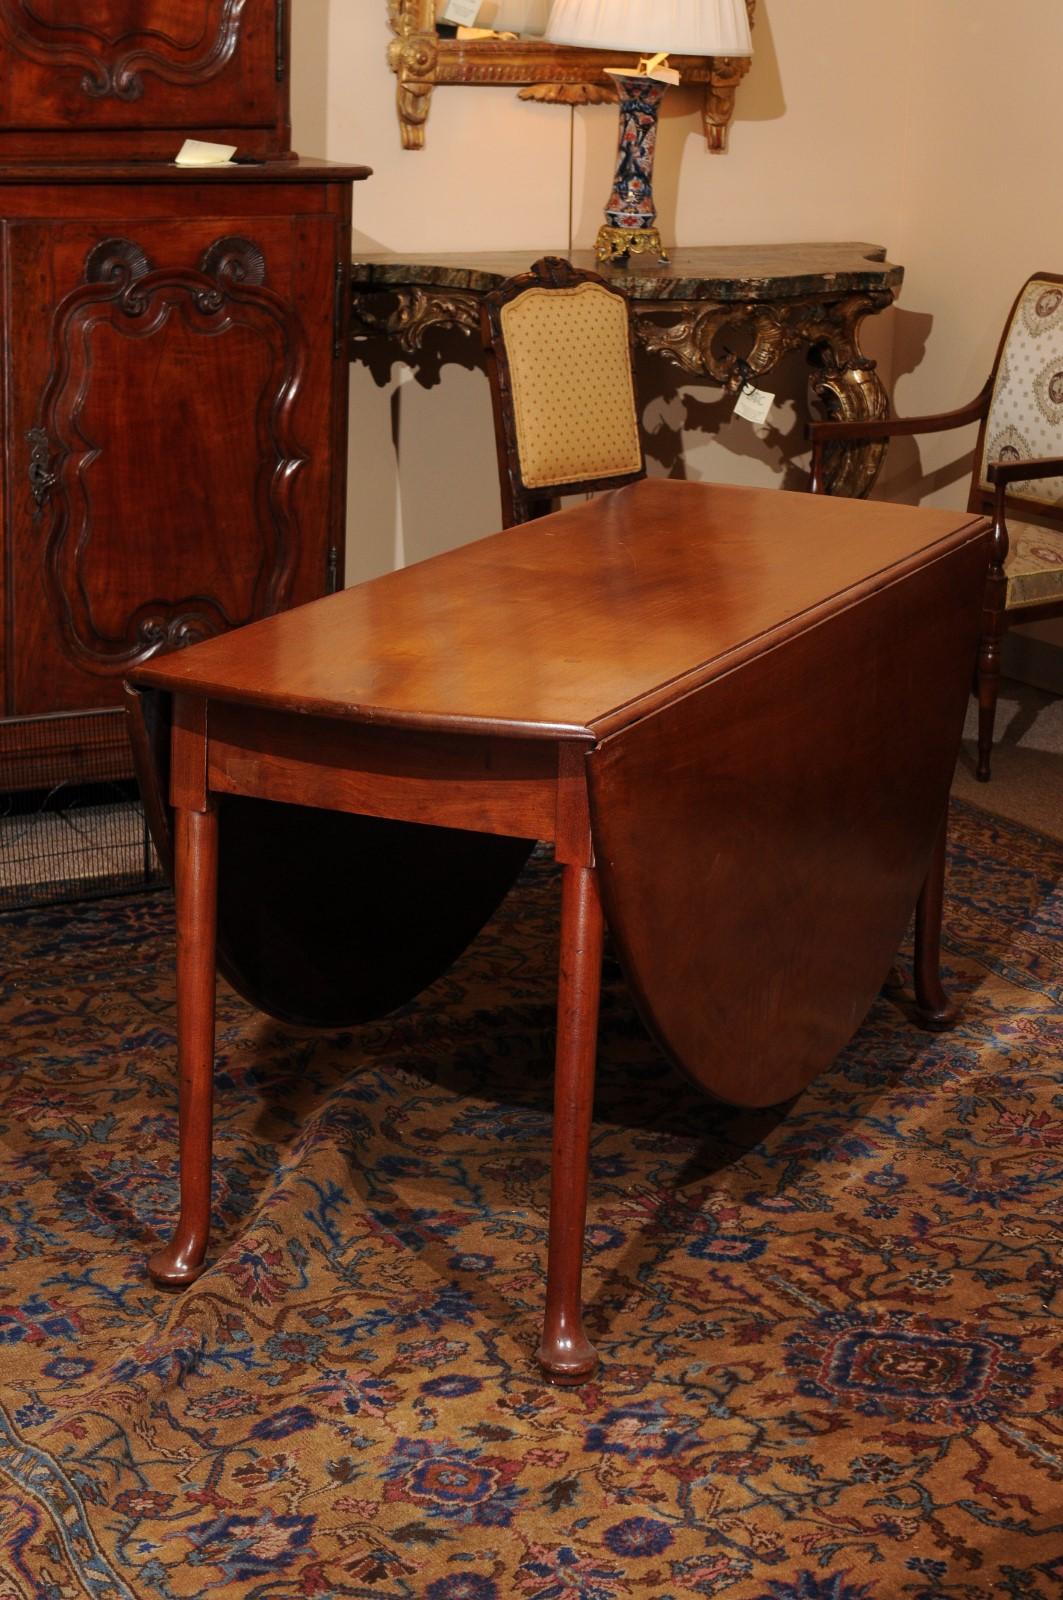  Mid-18th C English George II Mahogany Drop Leaf Oval Dining Table with Pad Feet For Sale 6